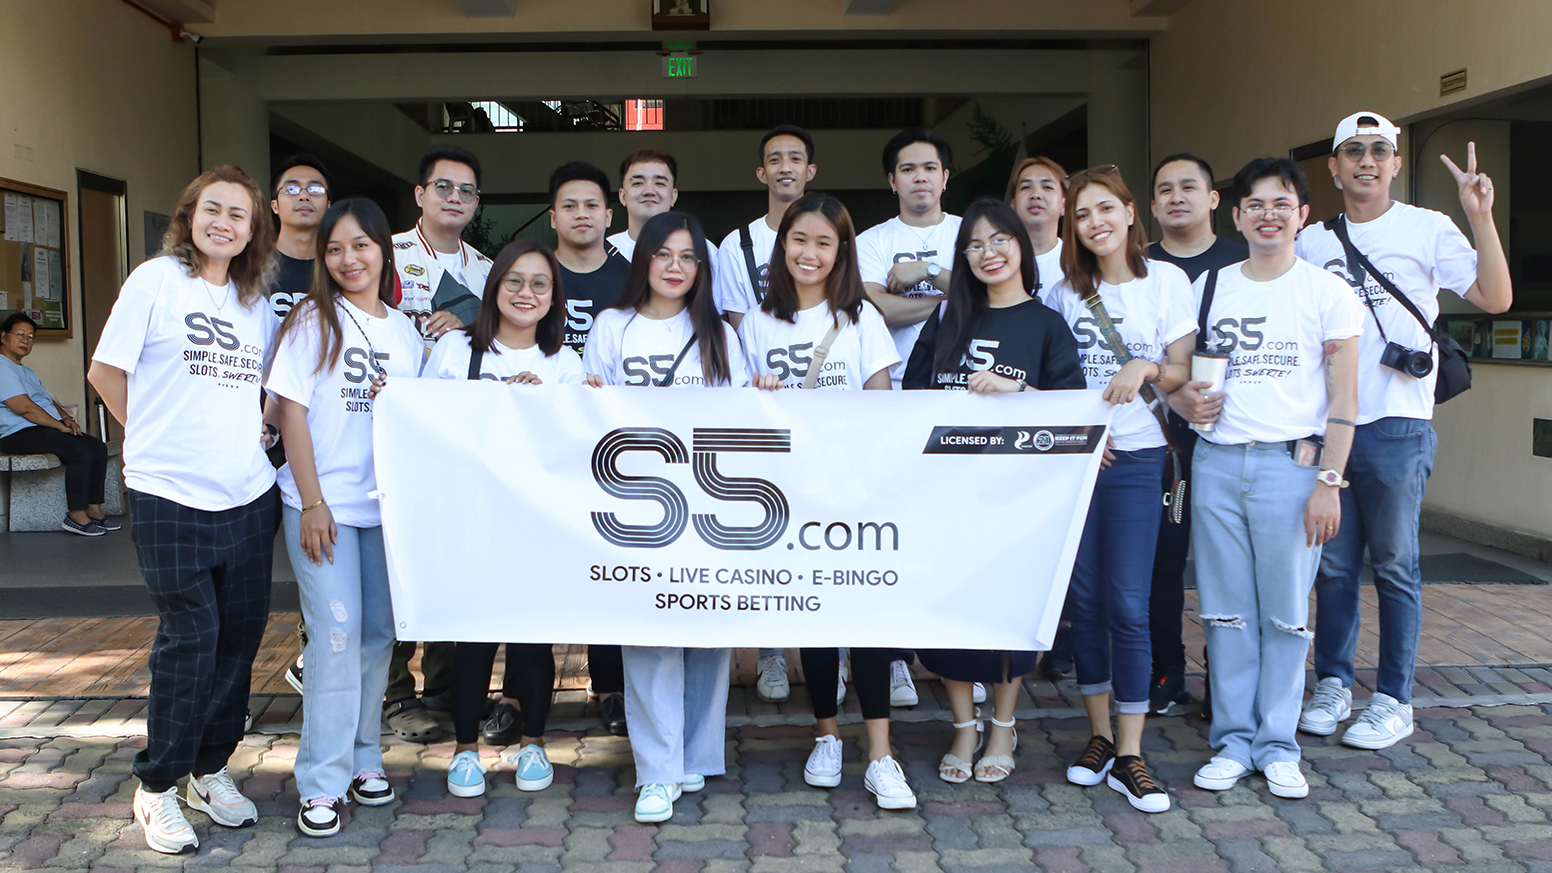 A Day with the Elderly: S5.com Celebrates Second Year Anniversary Through Community Service